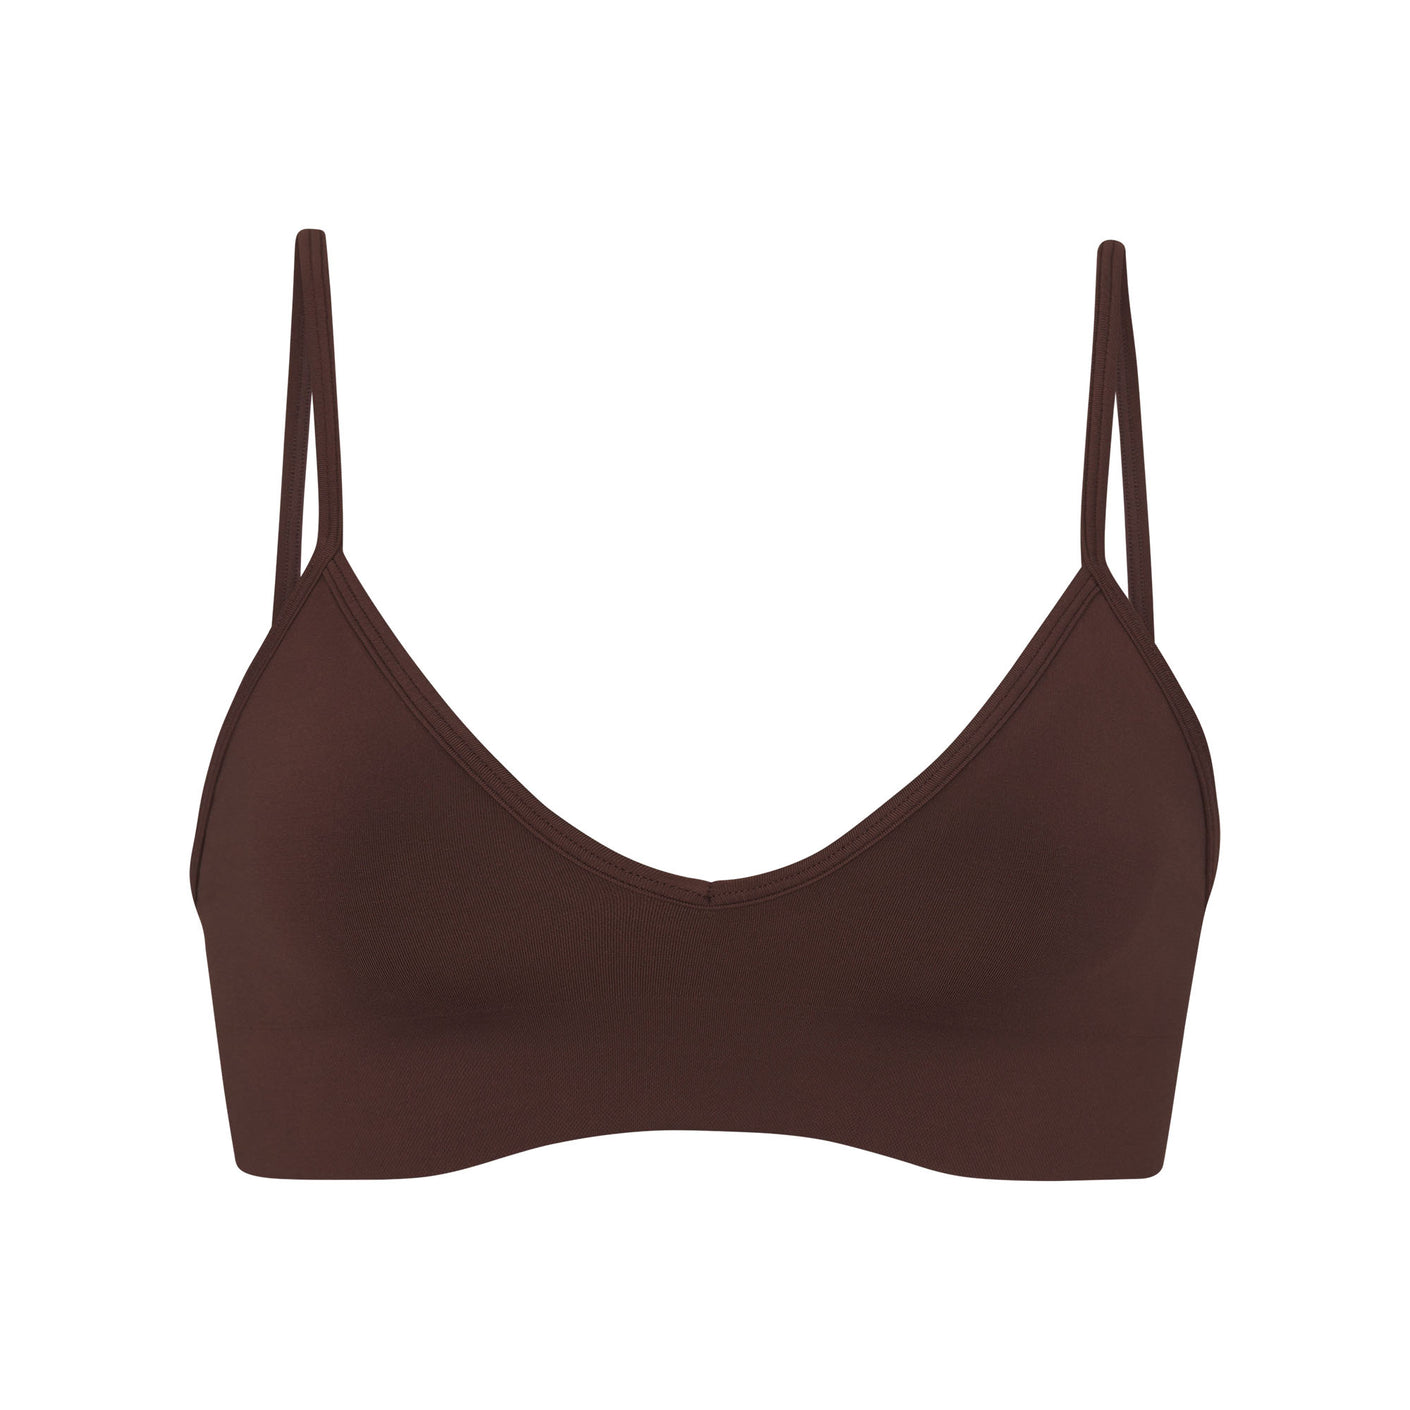 Its a must. Go get yourself the 'Soft Smoothing Bralette' from @skims.